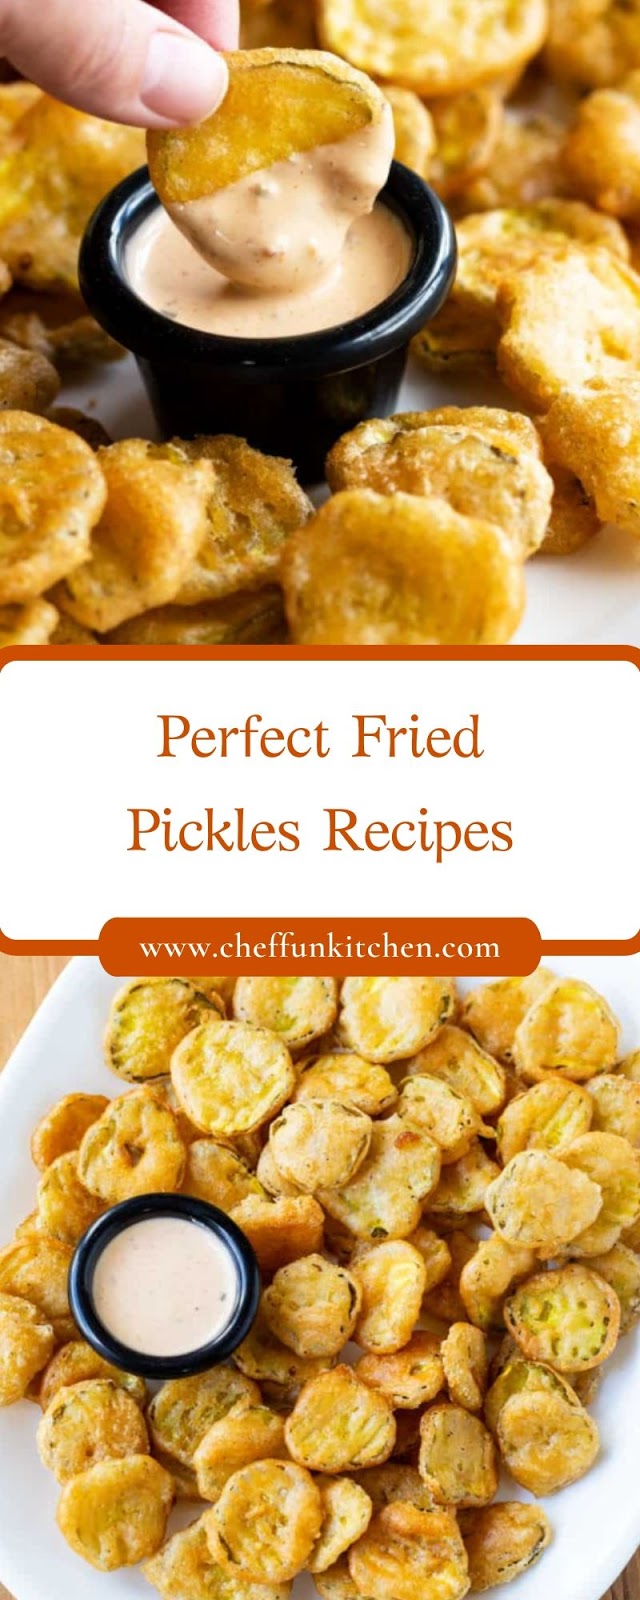 Perfect Fried Pickles Recipes